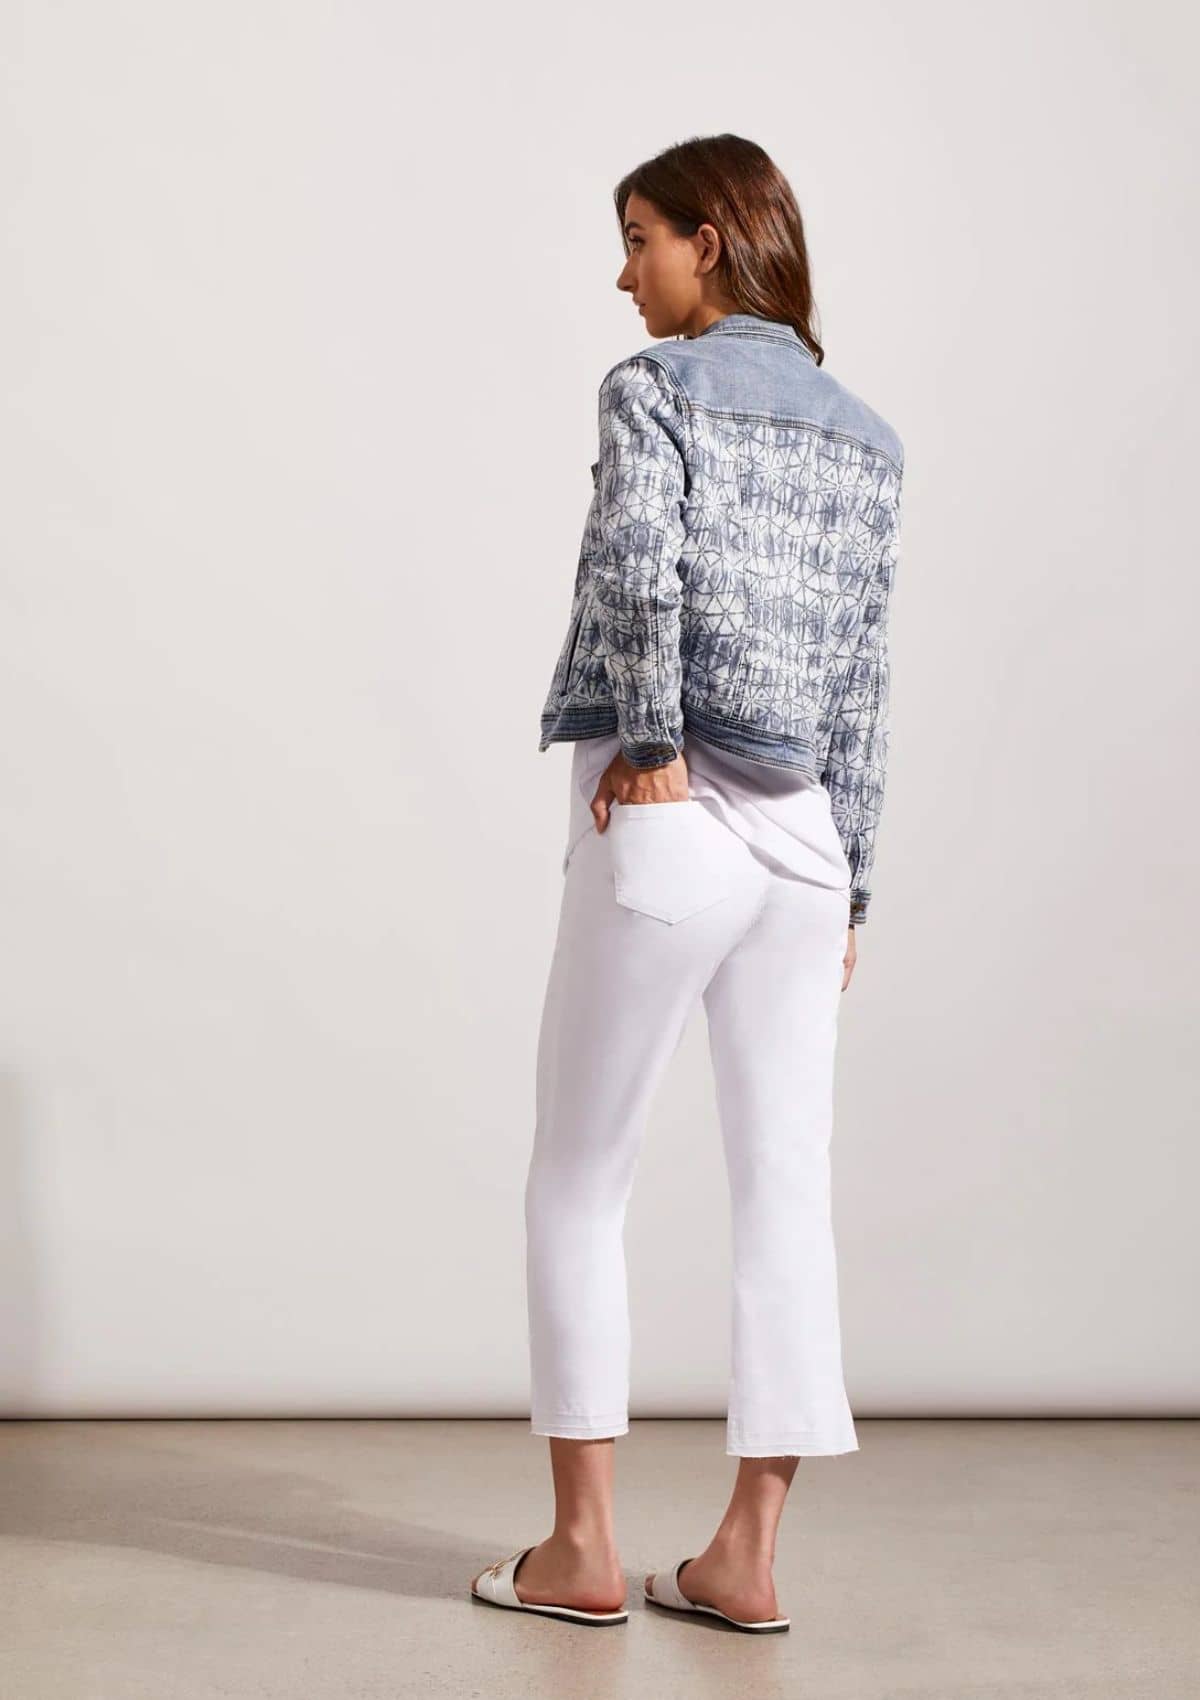 Cropped hems. Paired with white flat sandals and jean jacket.